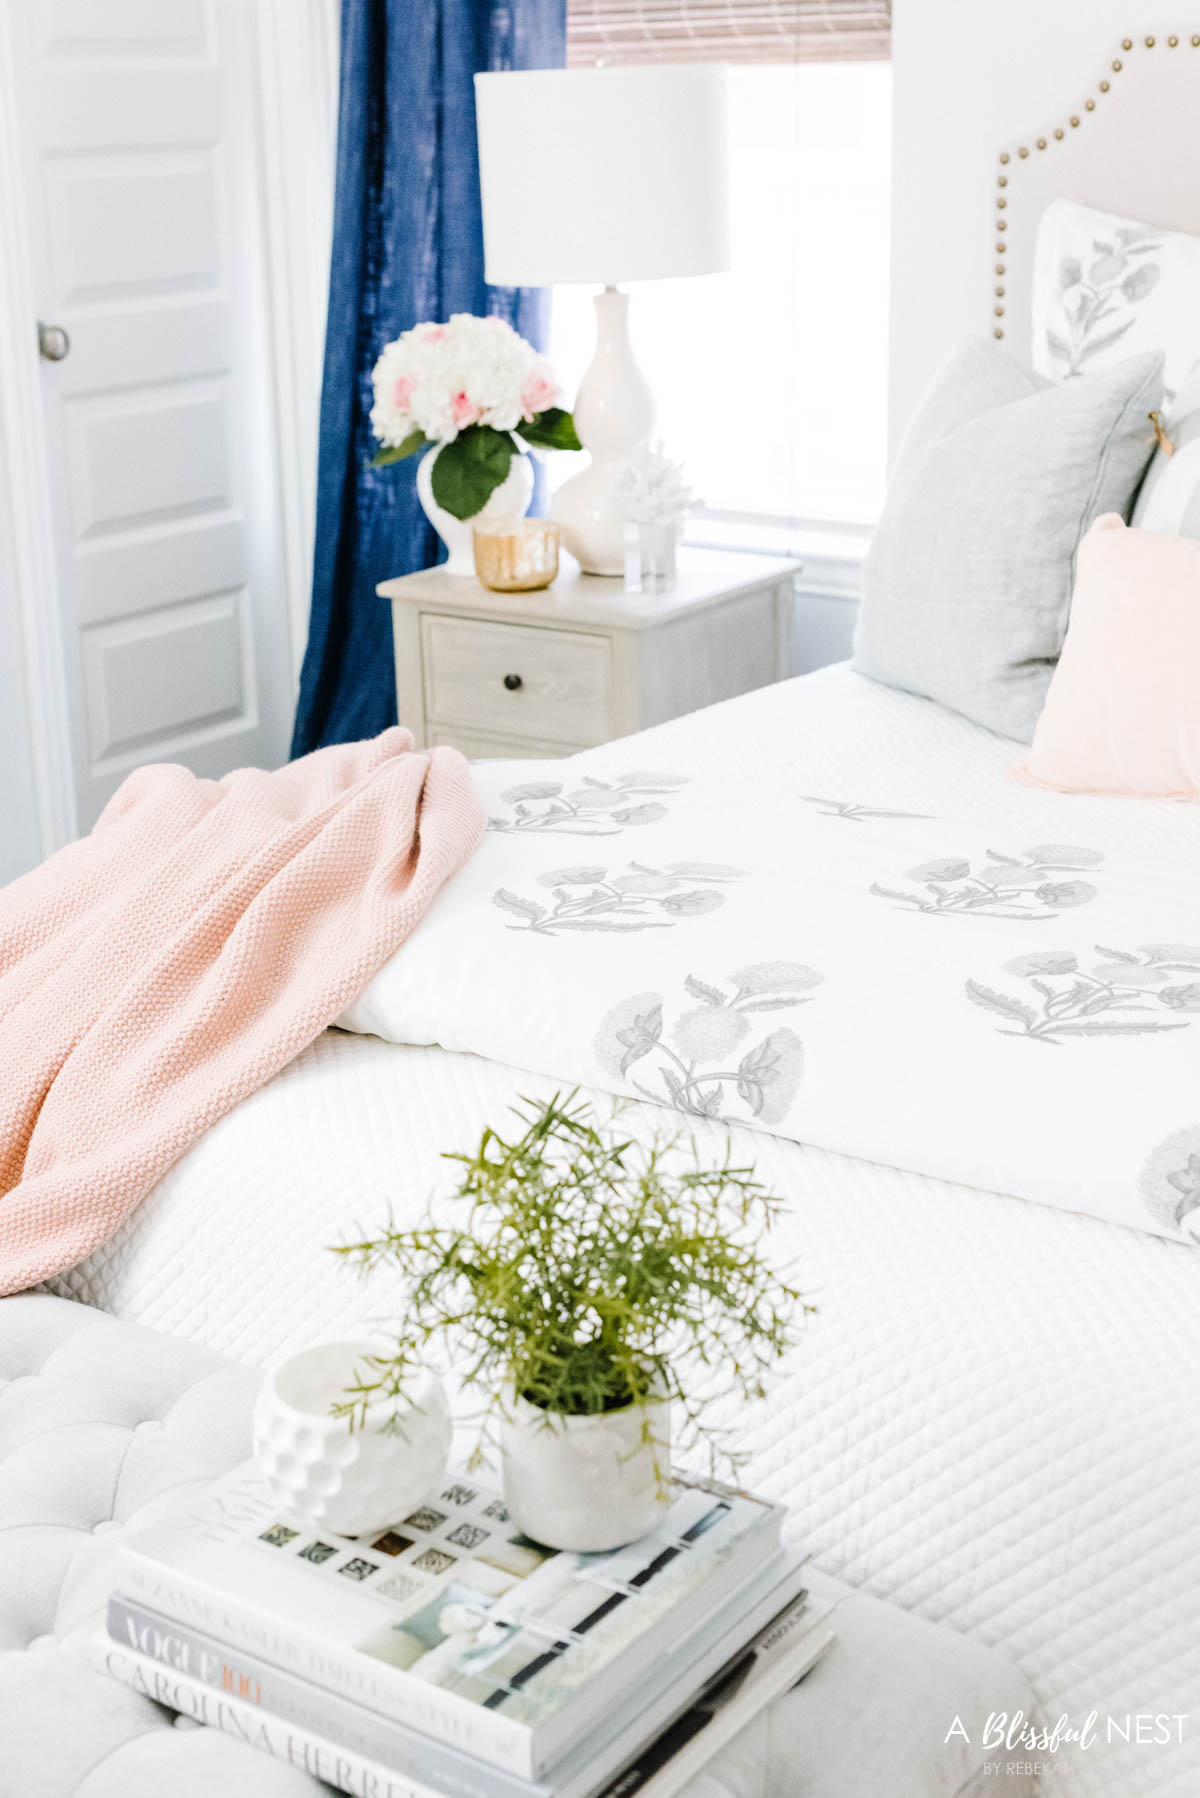 lightweight throw blanket in a soft blush pink at the end of the bed